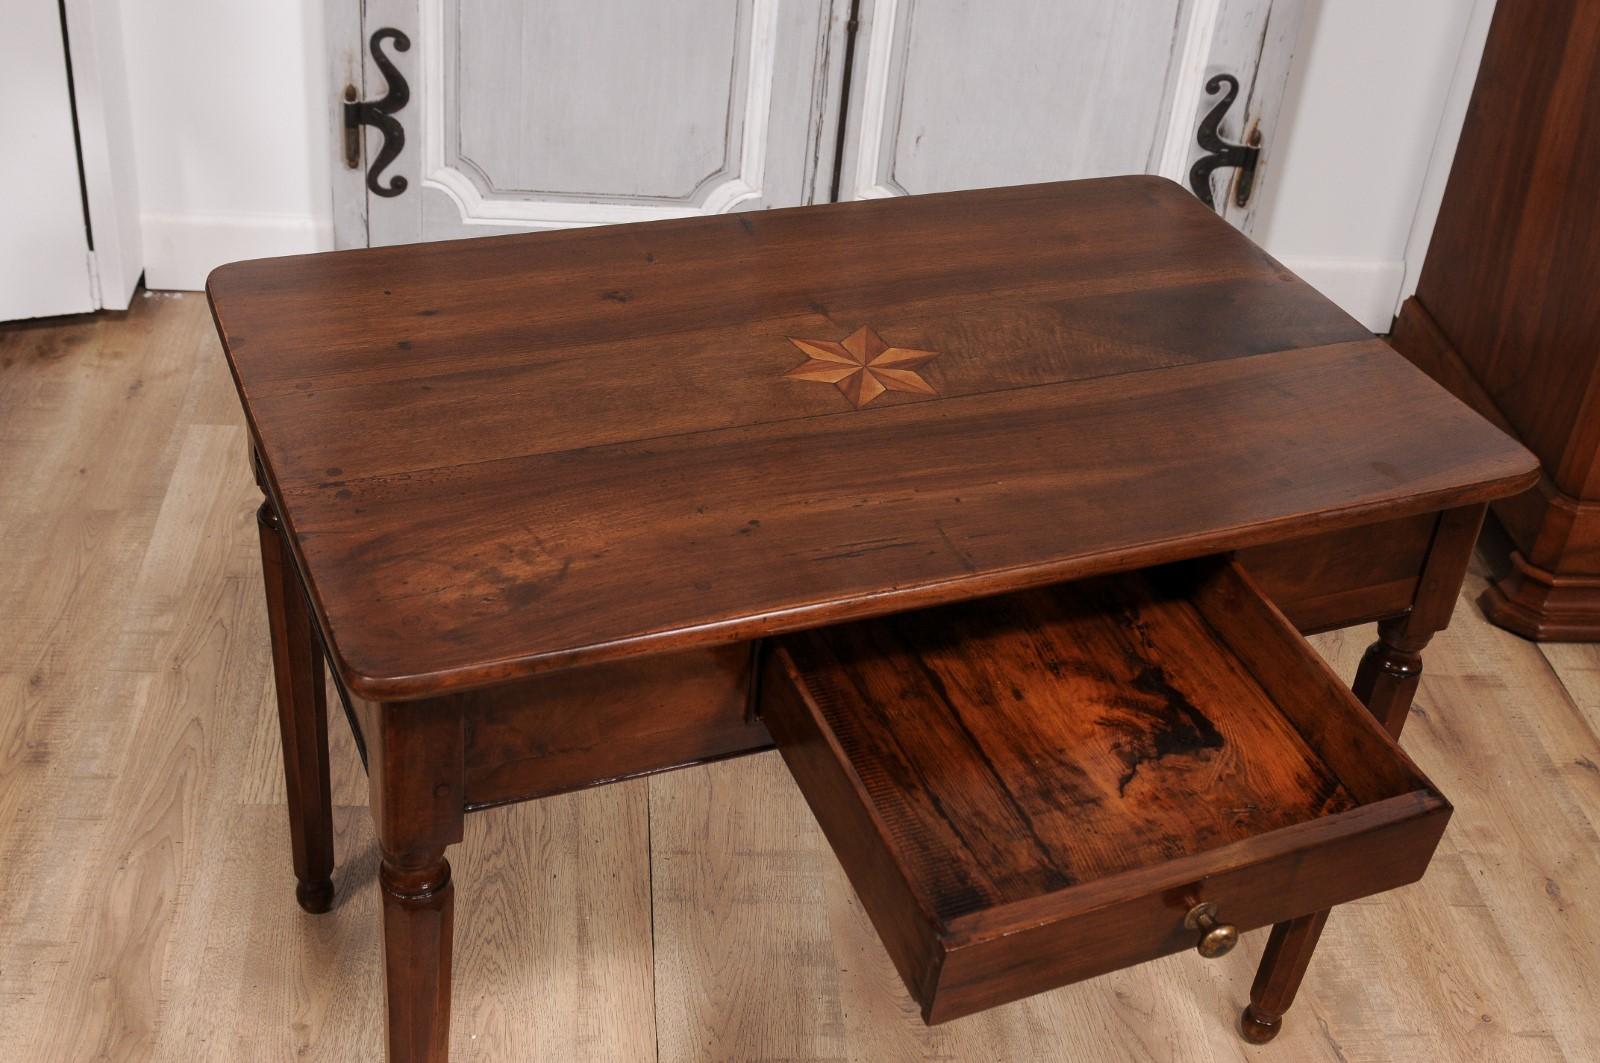 Italian 1890s Walnut Side Table with Elm Marquetry Star, Drawer and Turned Legs For Sale 1